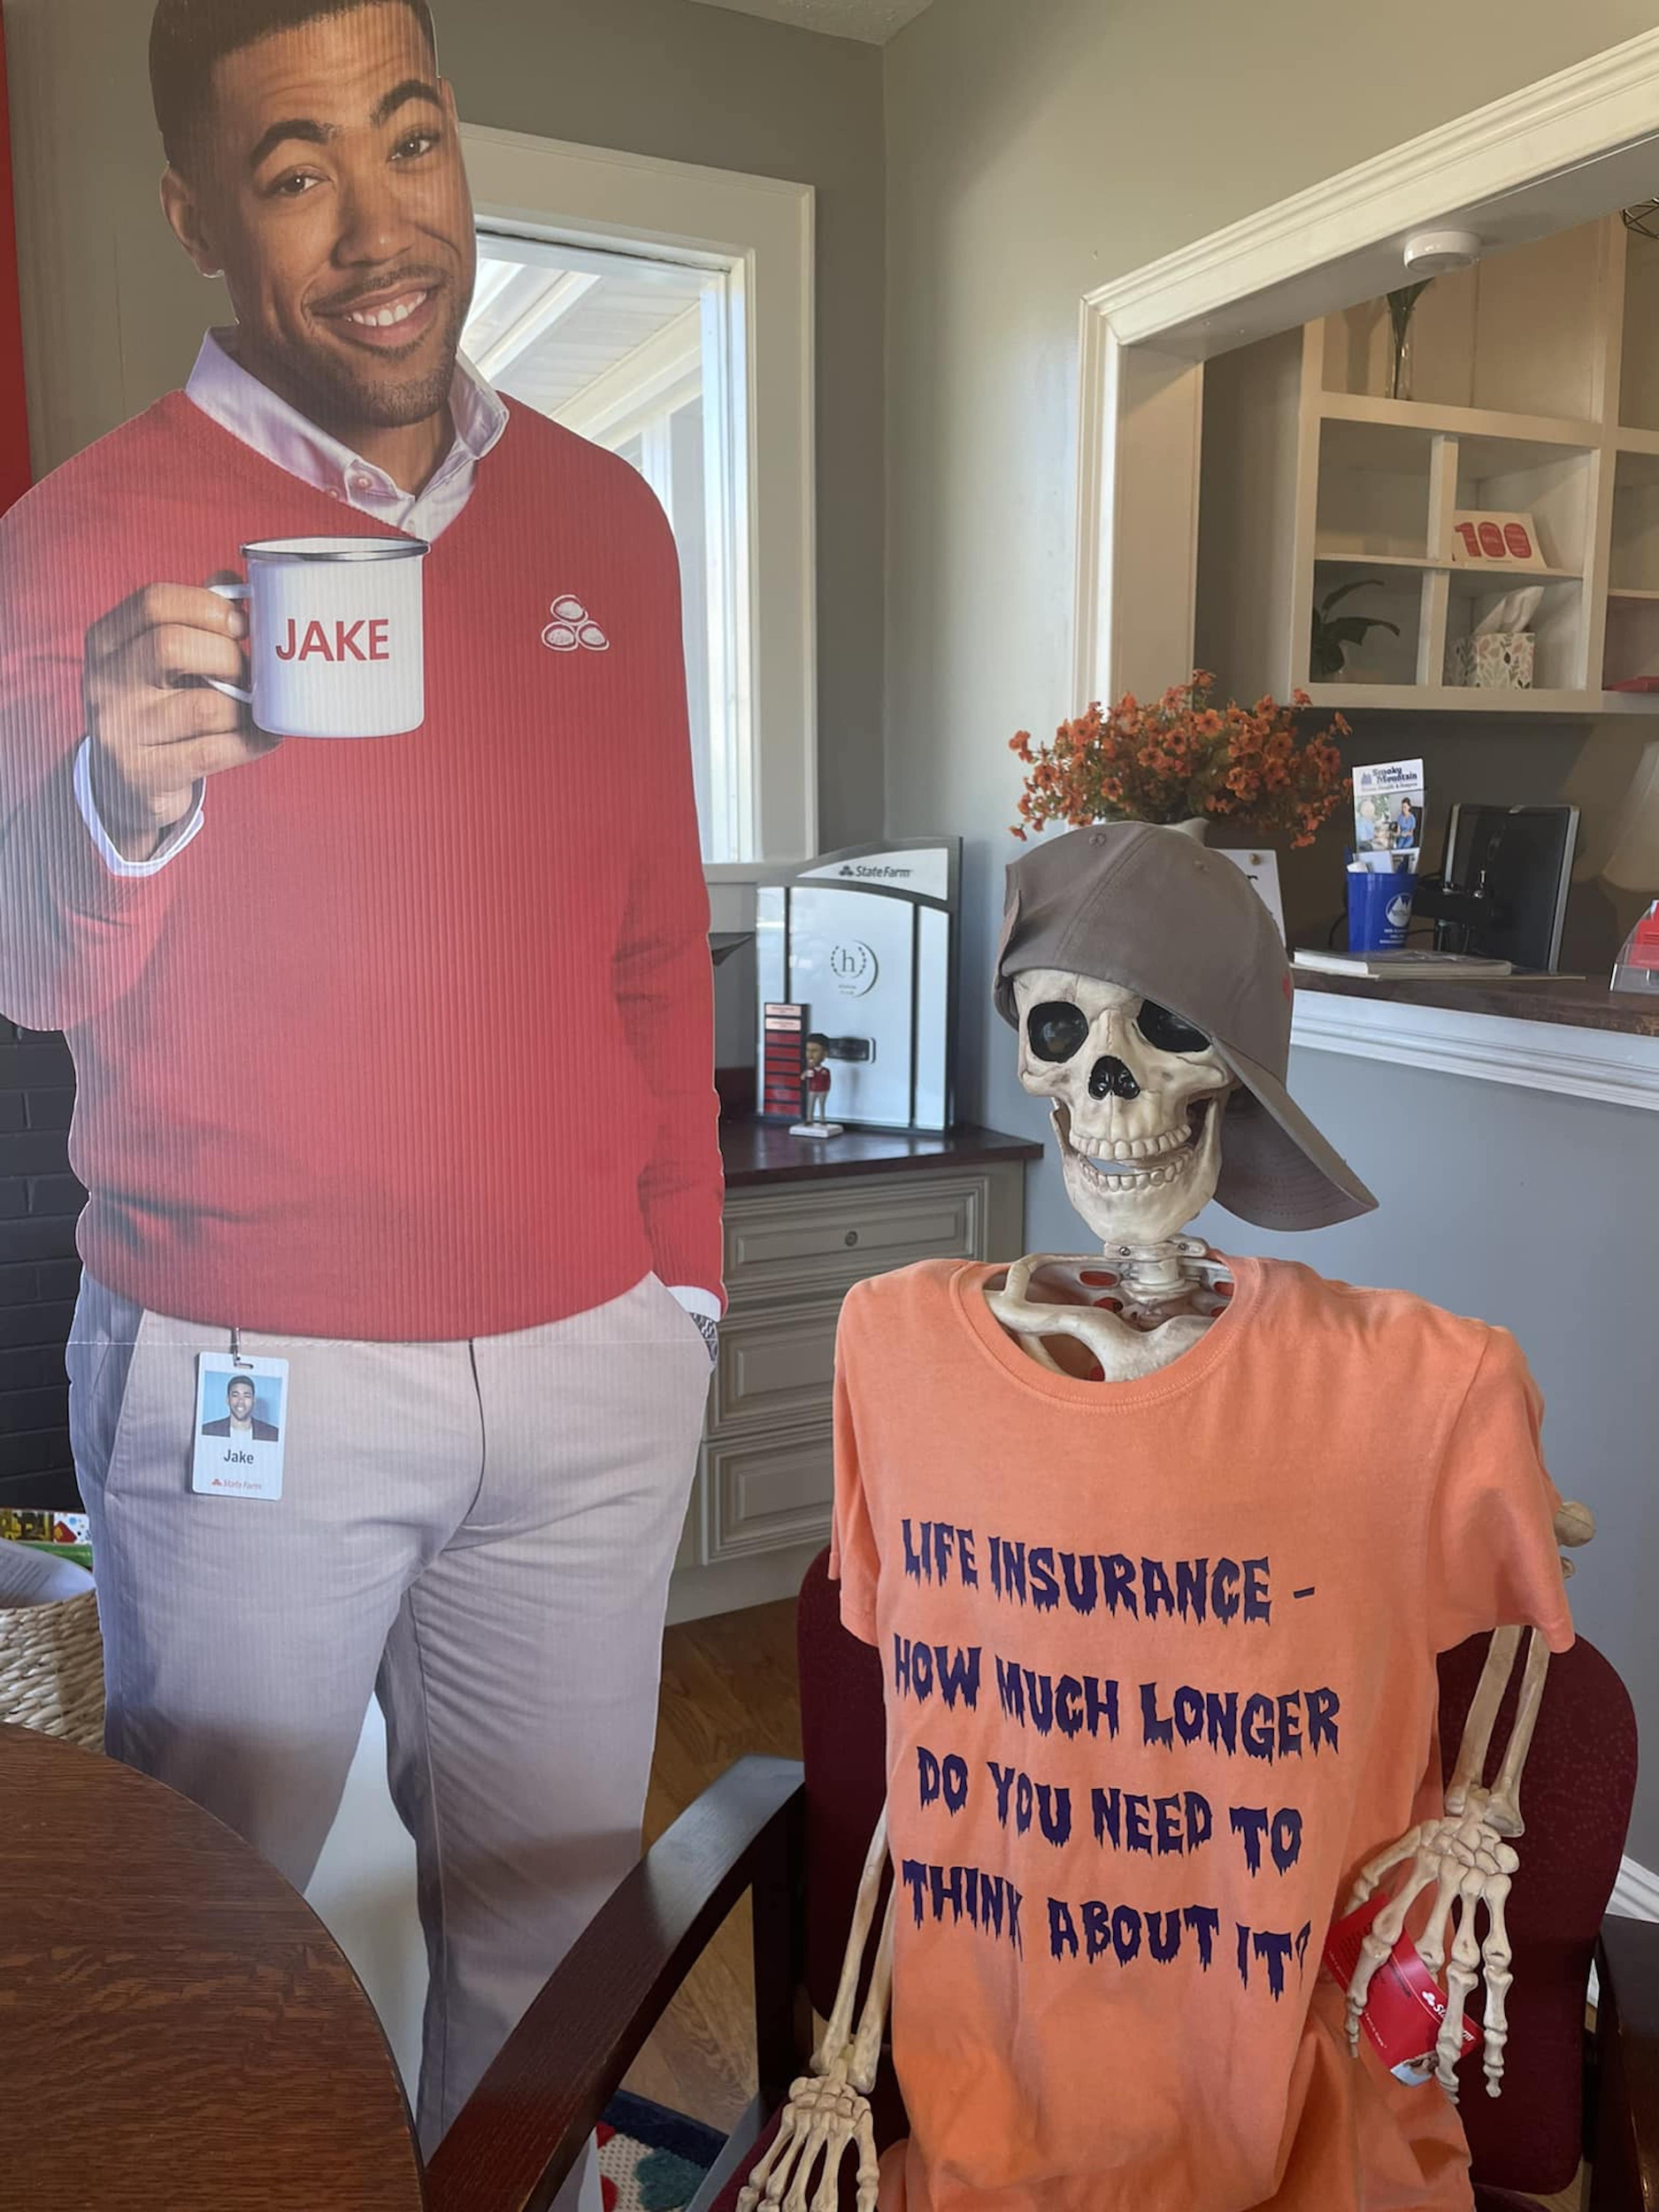 Bones and Jake say, "Life insurance?" How much longer do you need to think about it?